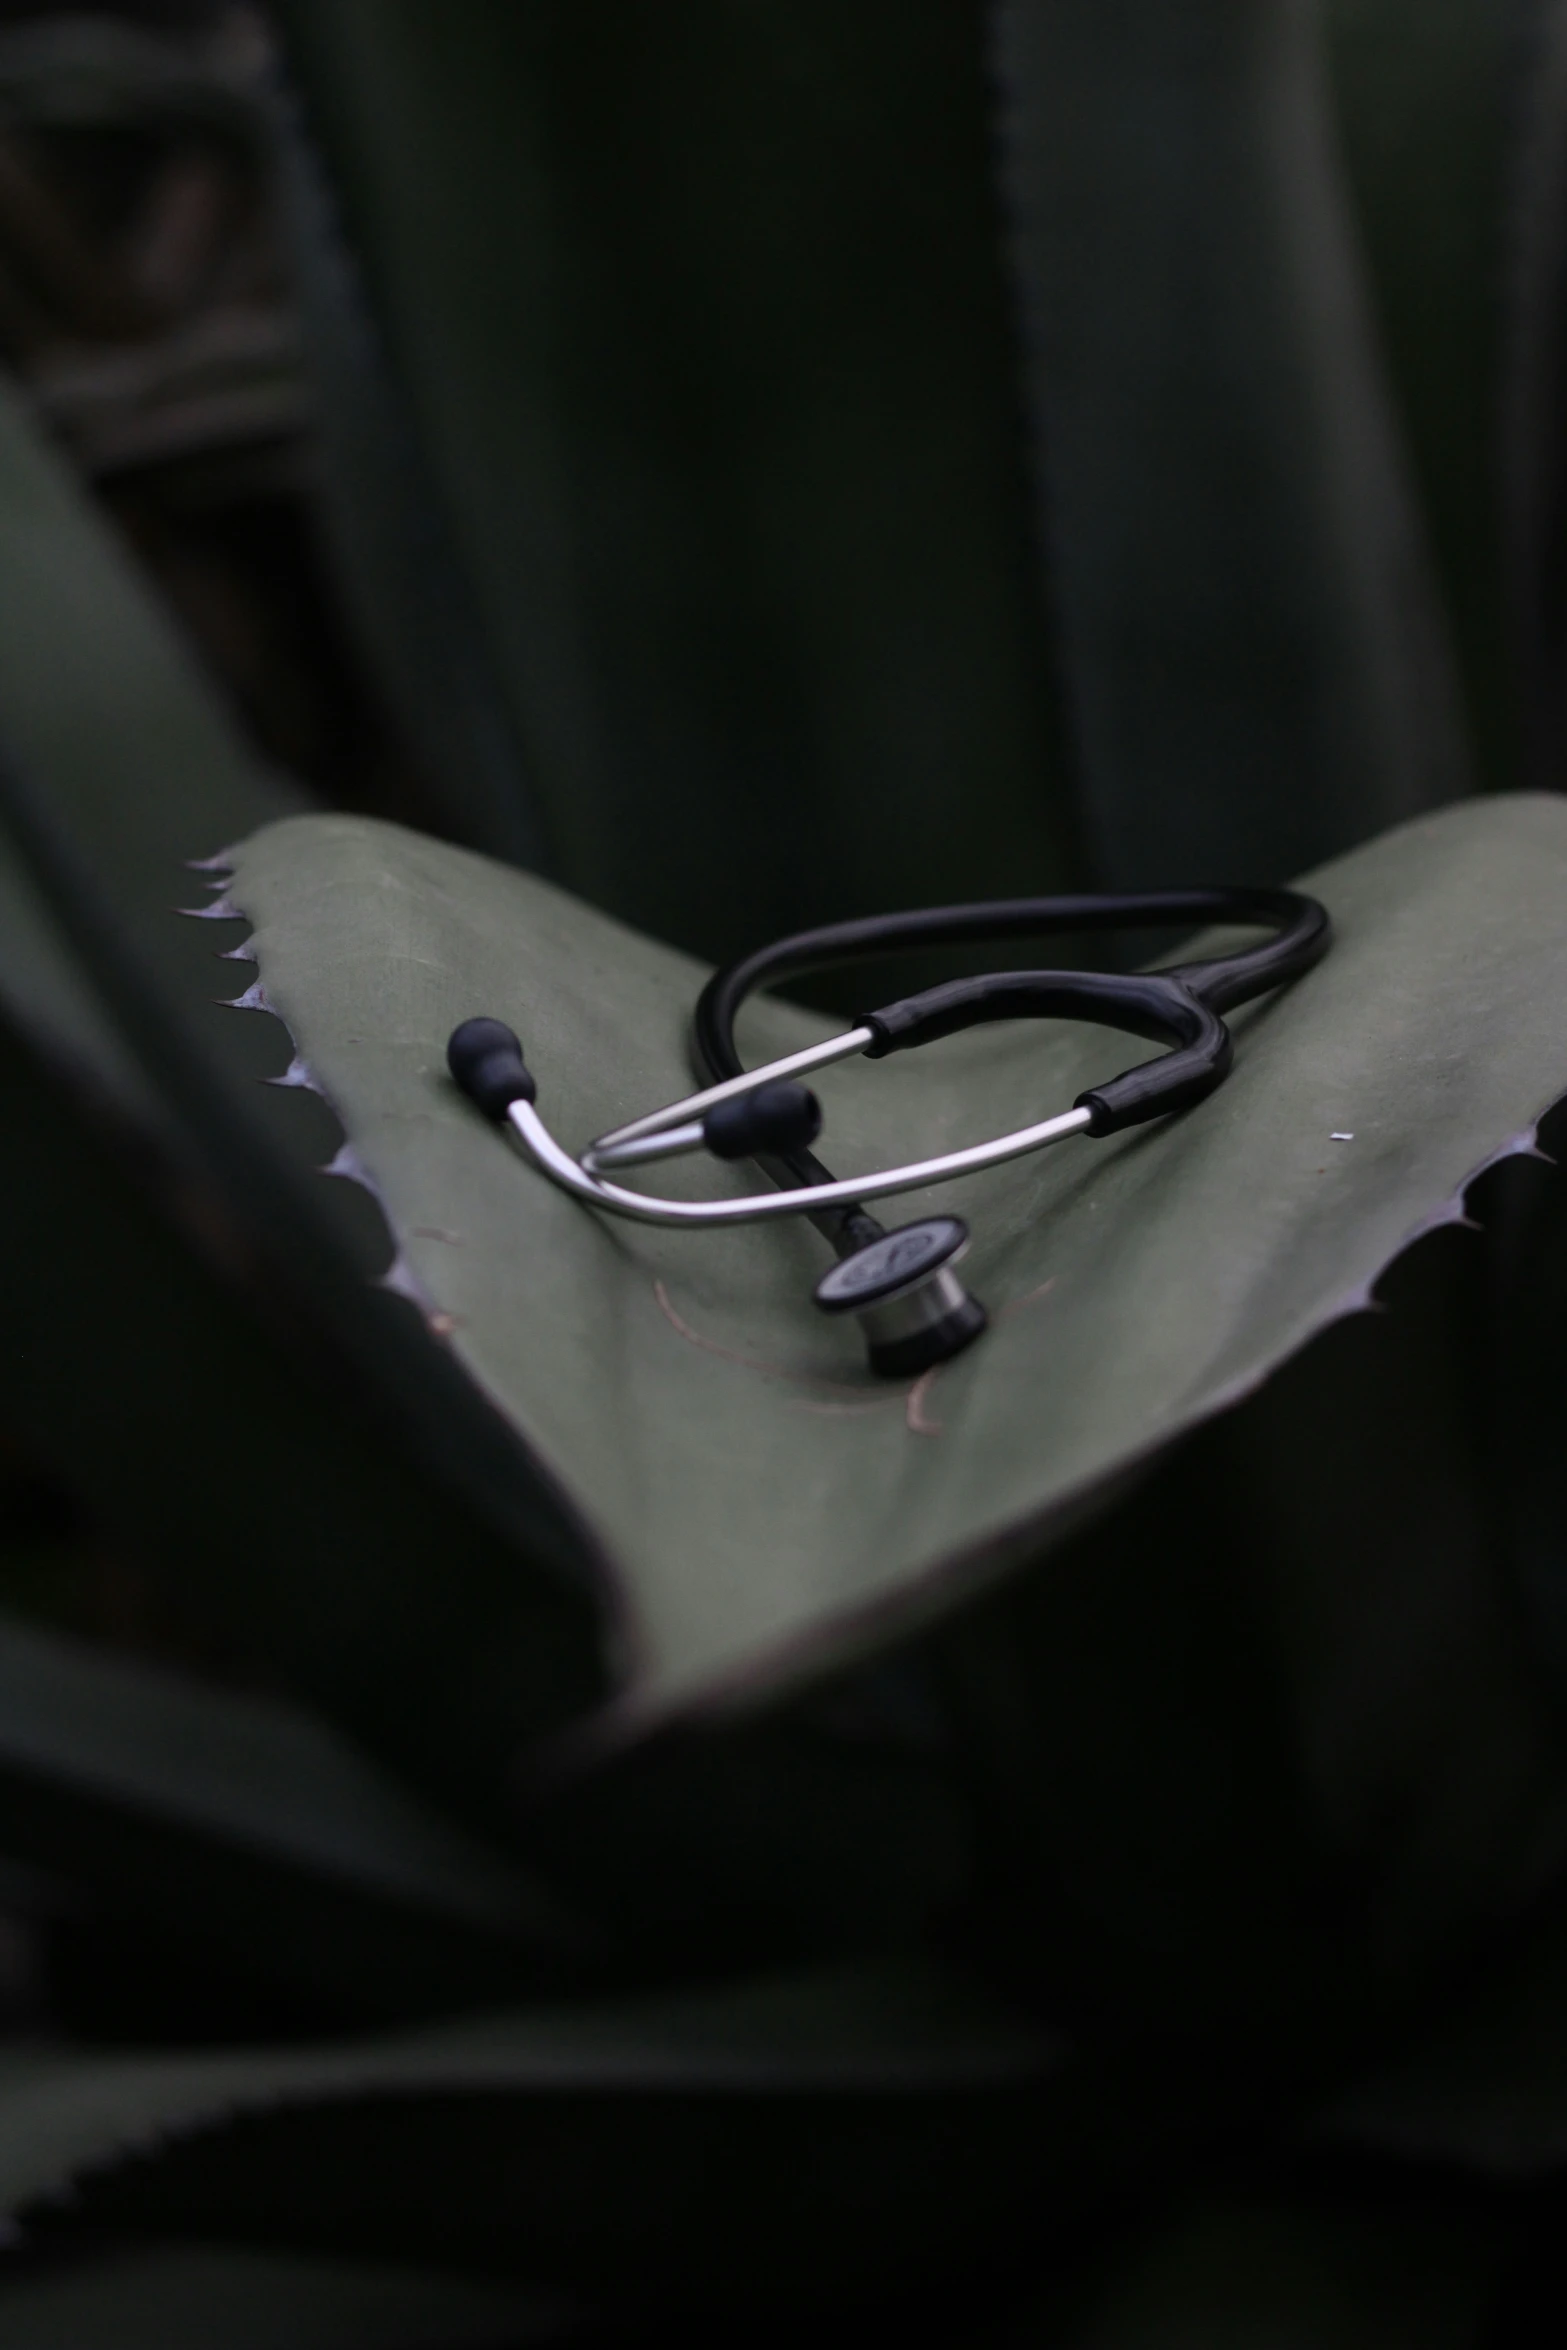 a medical stethoscope is placed on a cactus